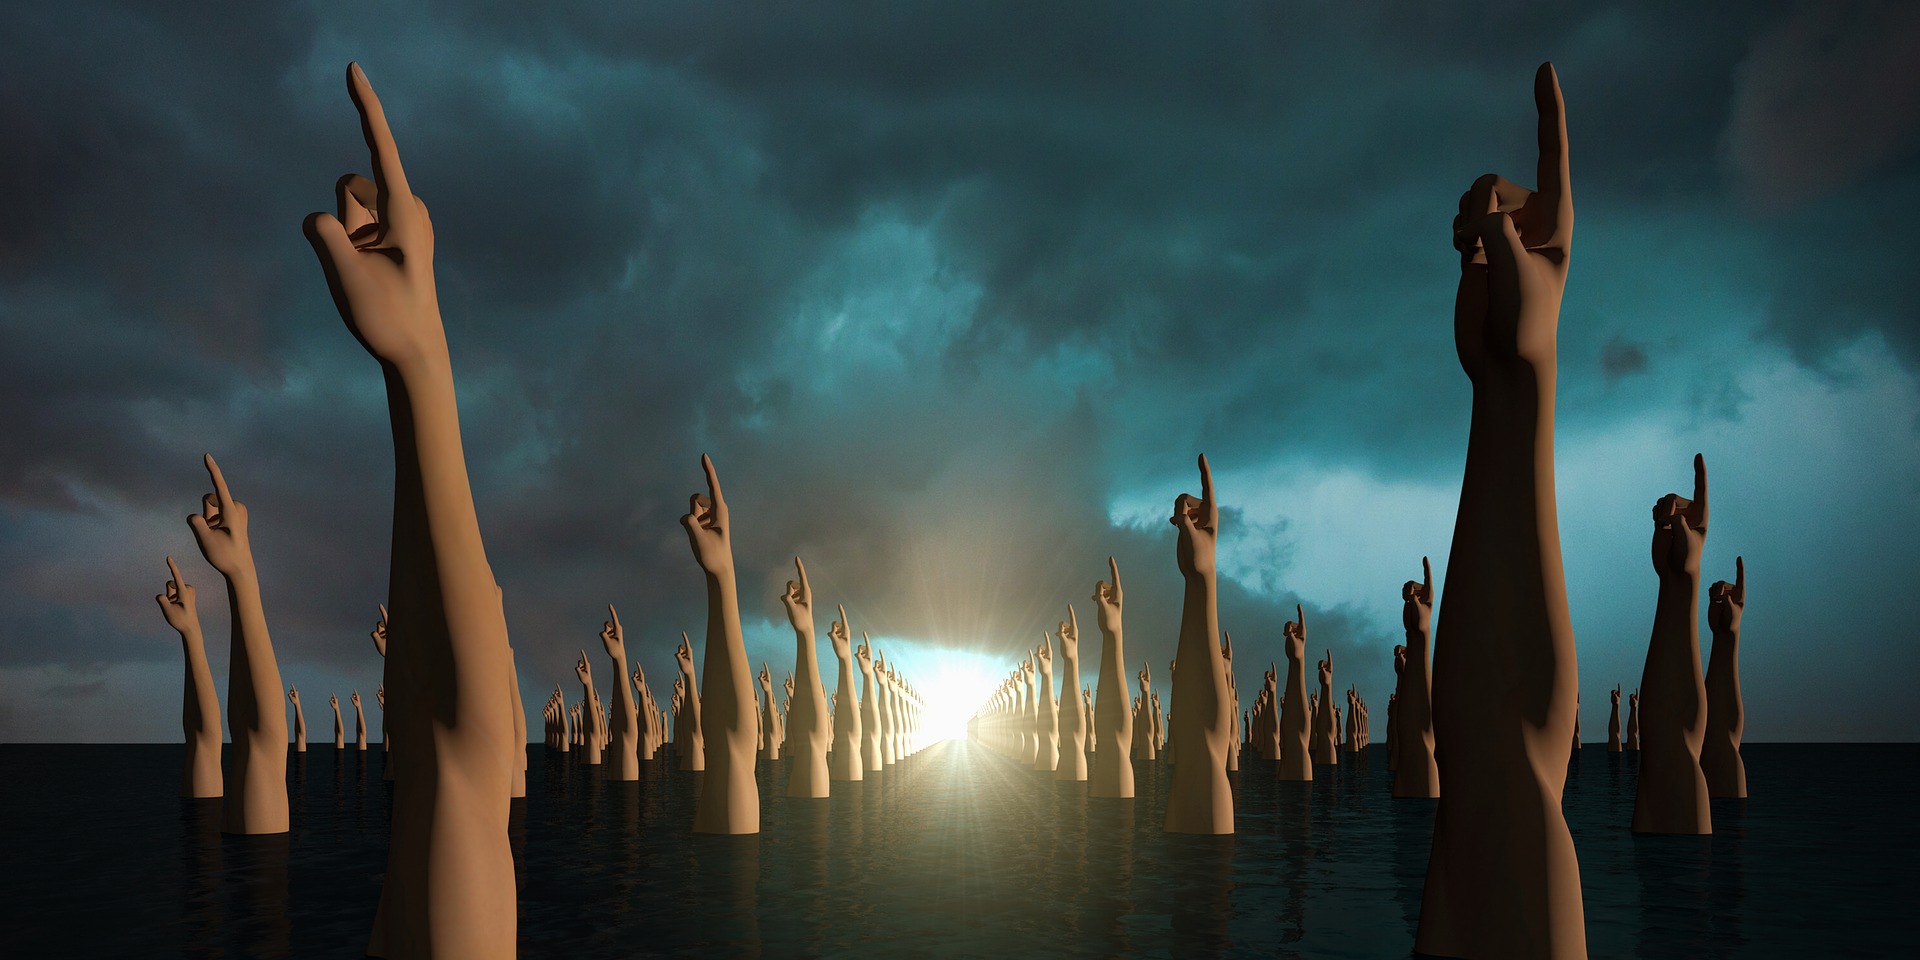 Field of CG-rendered disembodied arms pointing at a dark sky at sunrise